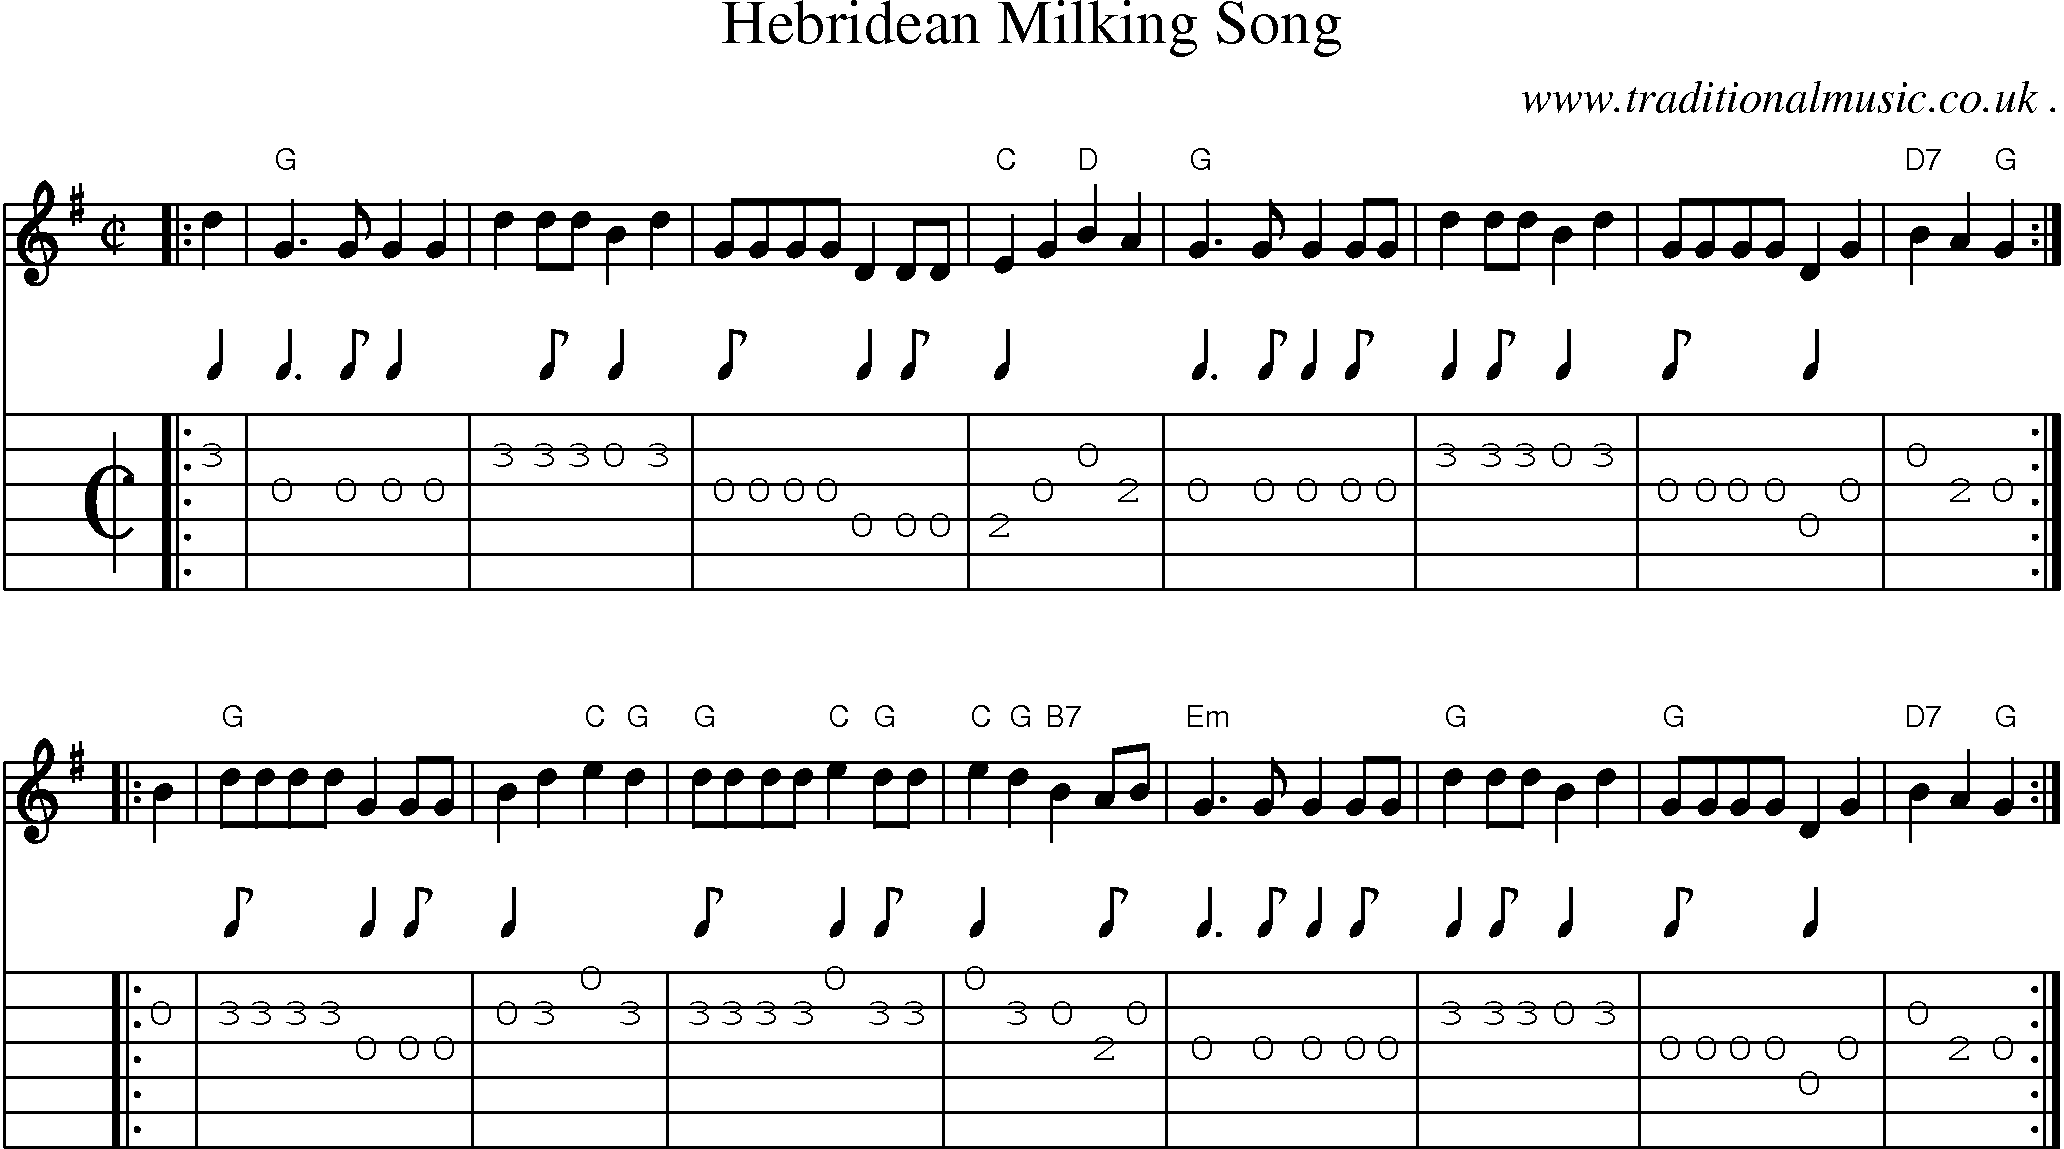 Sheet-music  score, Chords and Guitar Tabs for Hebridean Milking Song